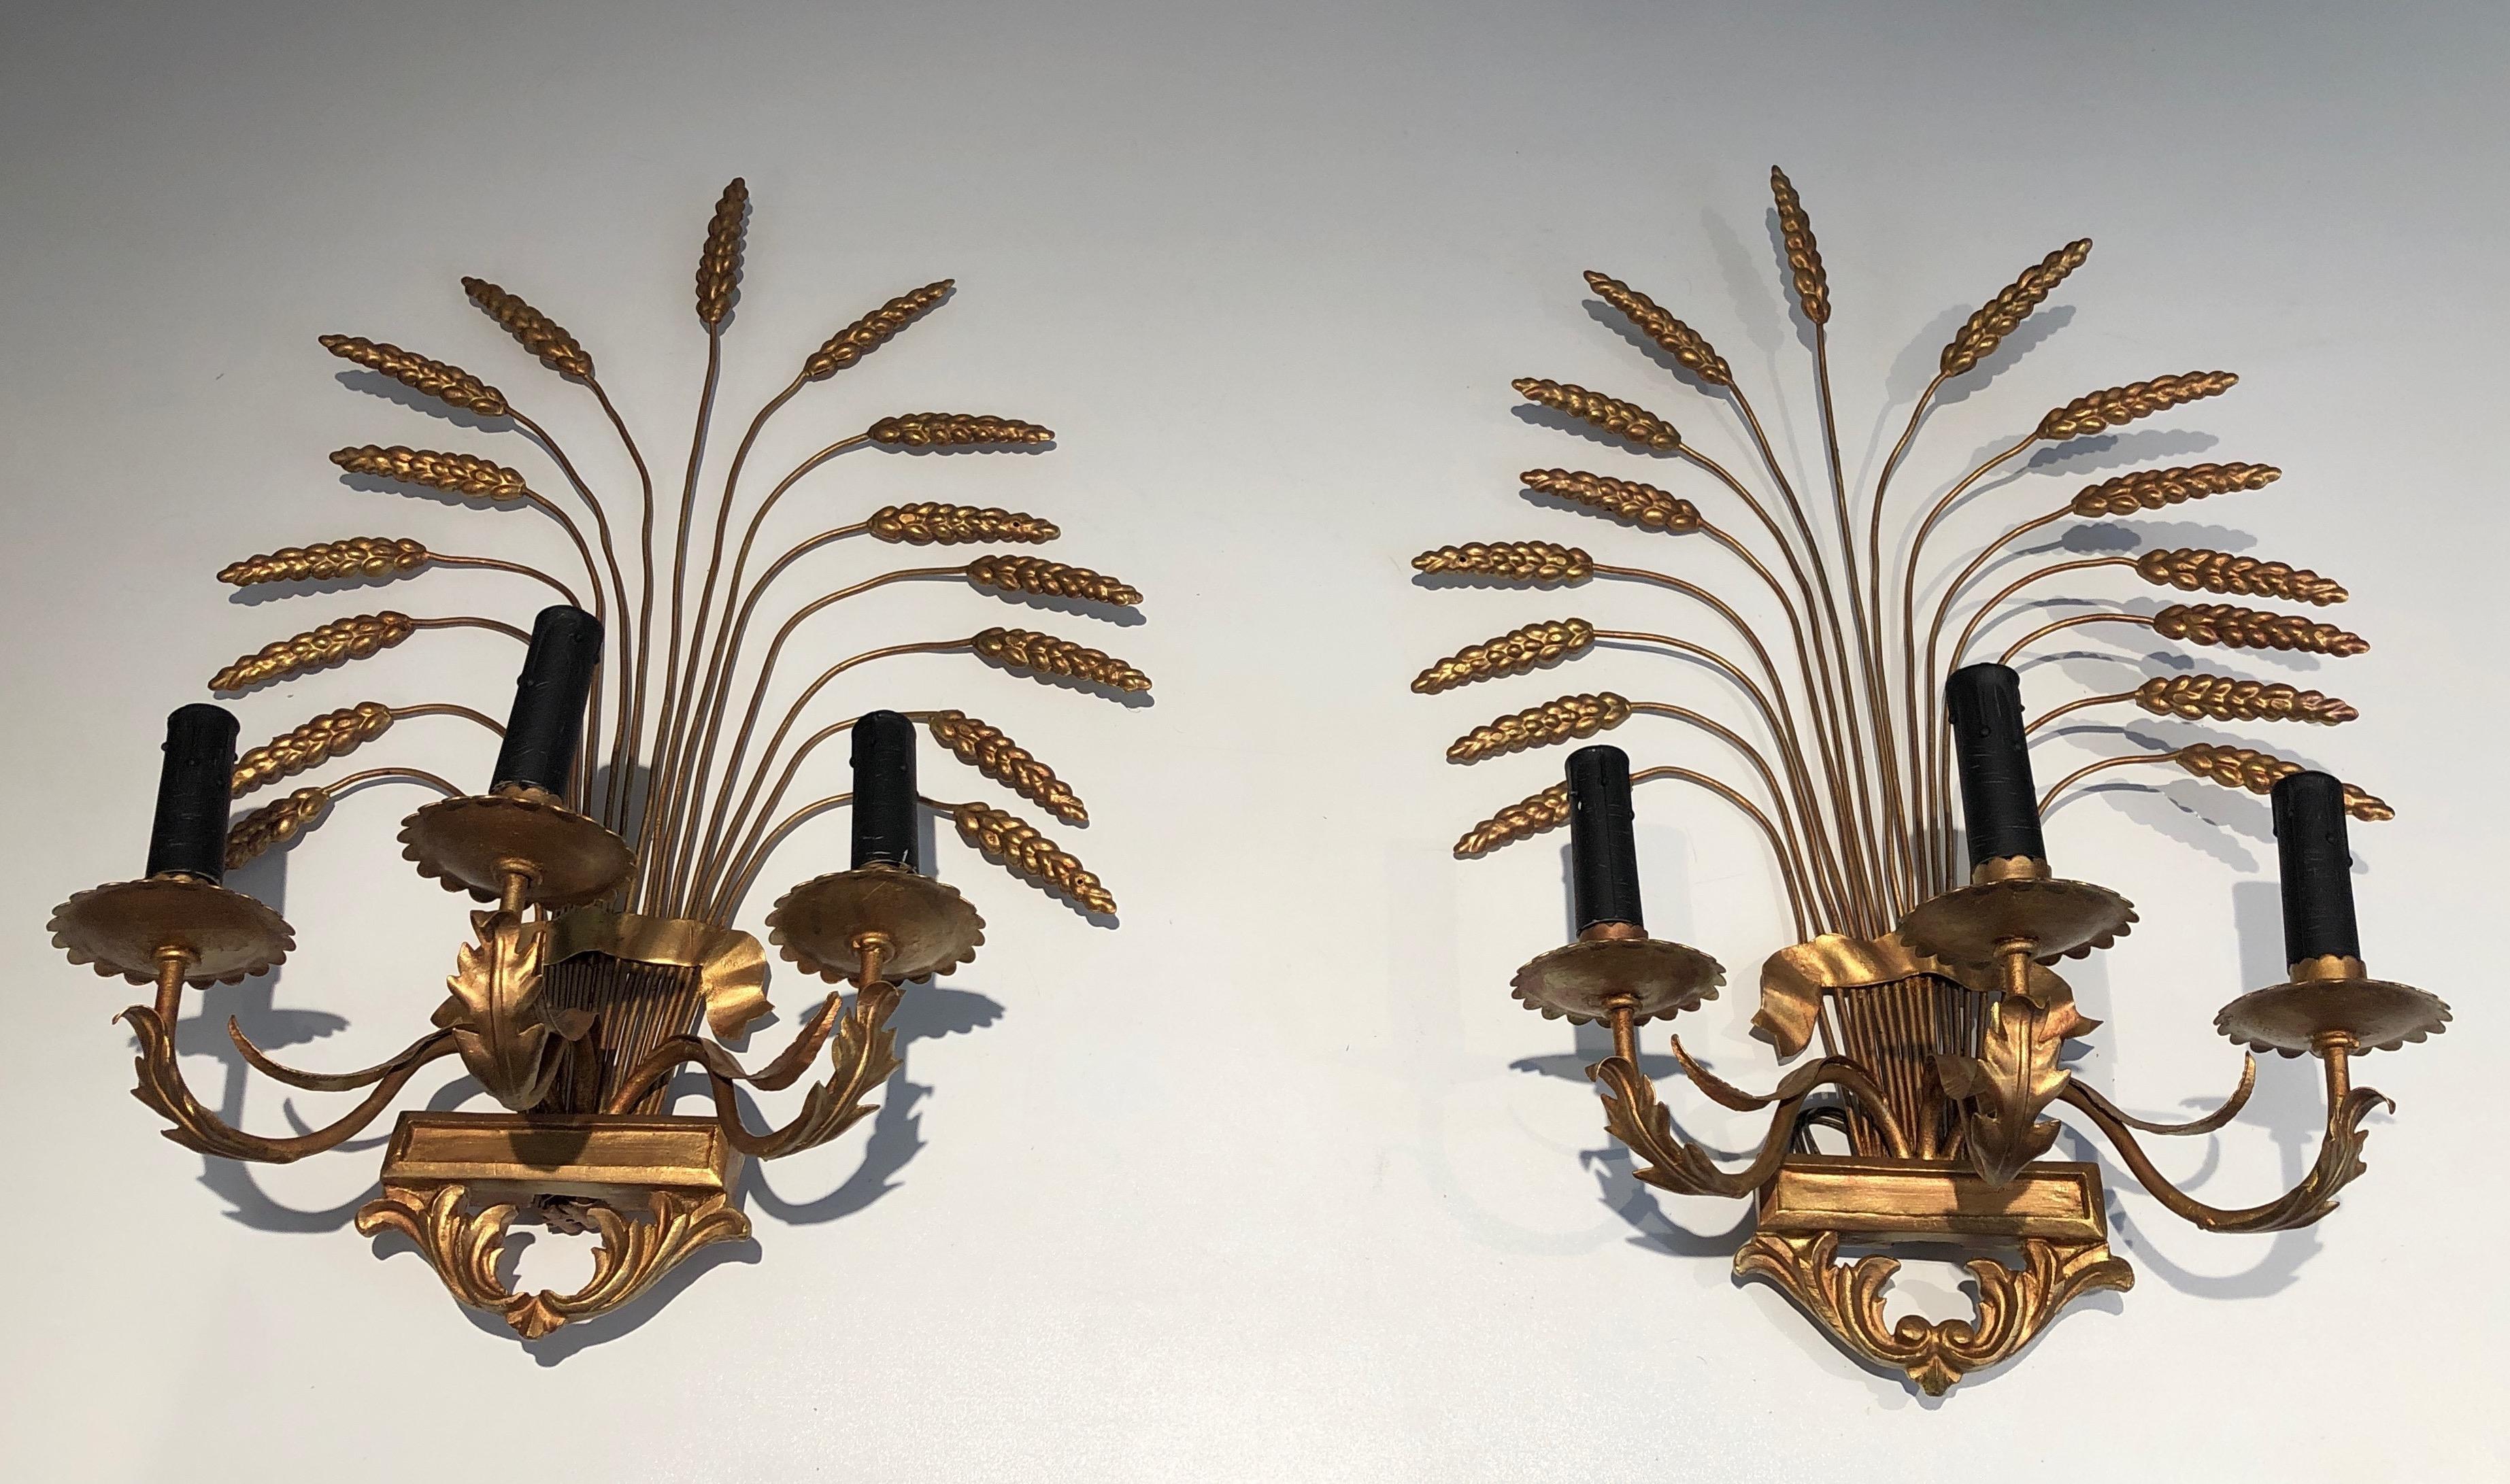 Pair of decorative gilded wheat wall sconces. French work in the style of Coco Channel. Circa 1970.